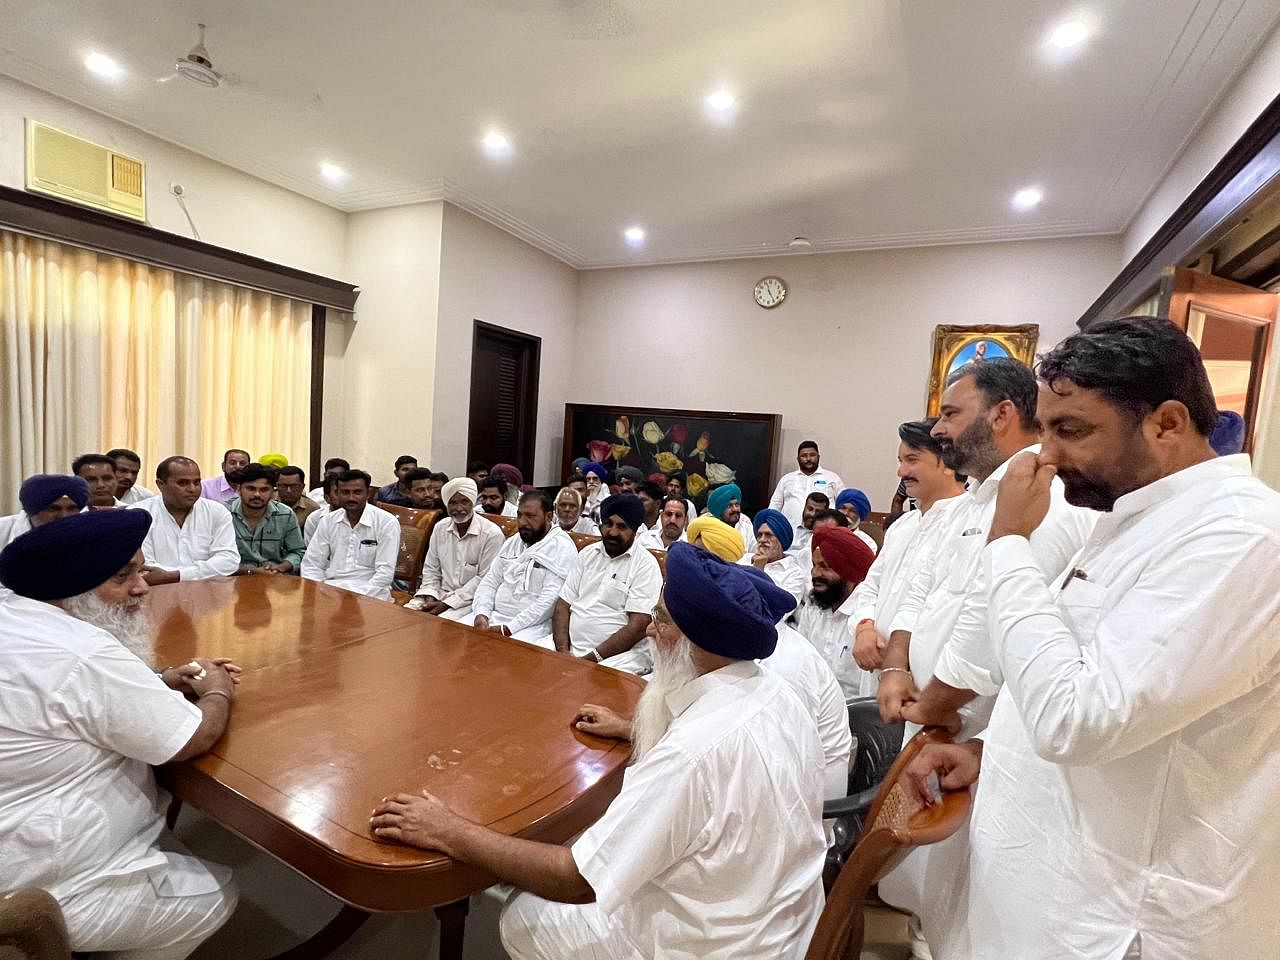 Akali Dal Chief Sukhbir Badal meeting party workers in his house in Muktsar Sahib | By special arrangement 